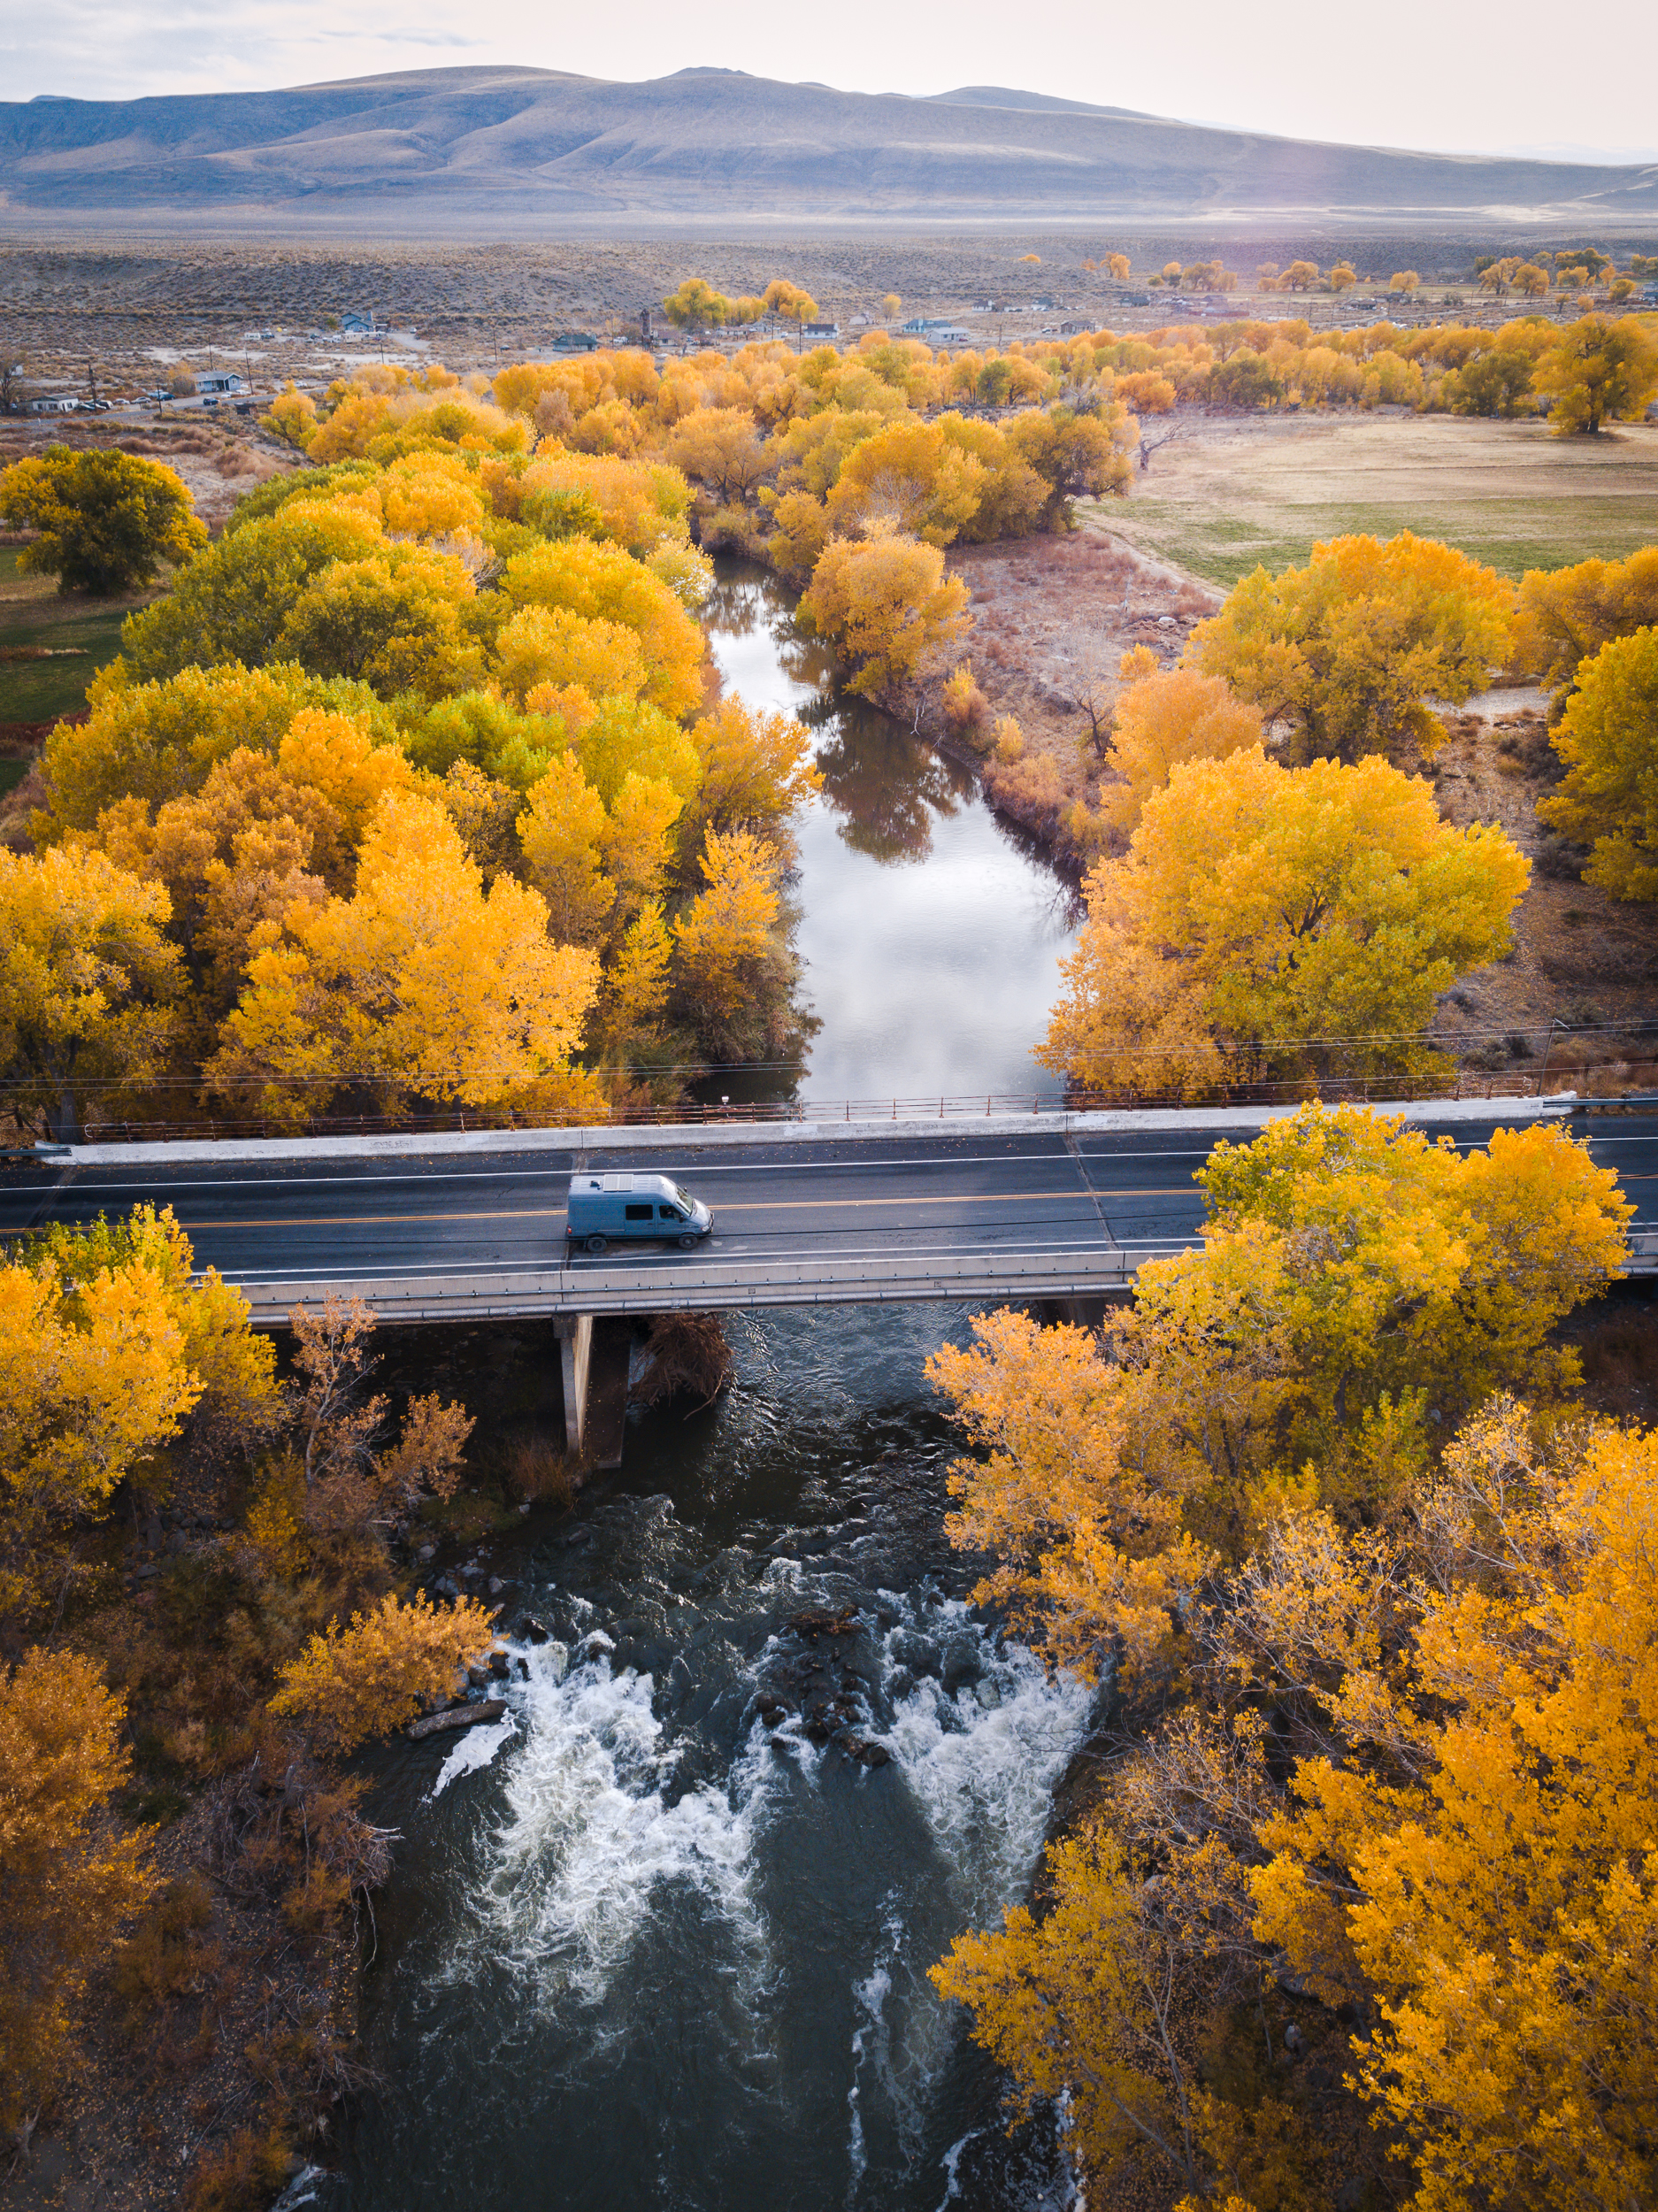 Driving through fall colors along the Truckee River outside Reno, Nevada.